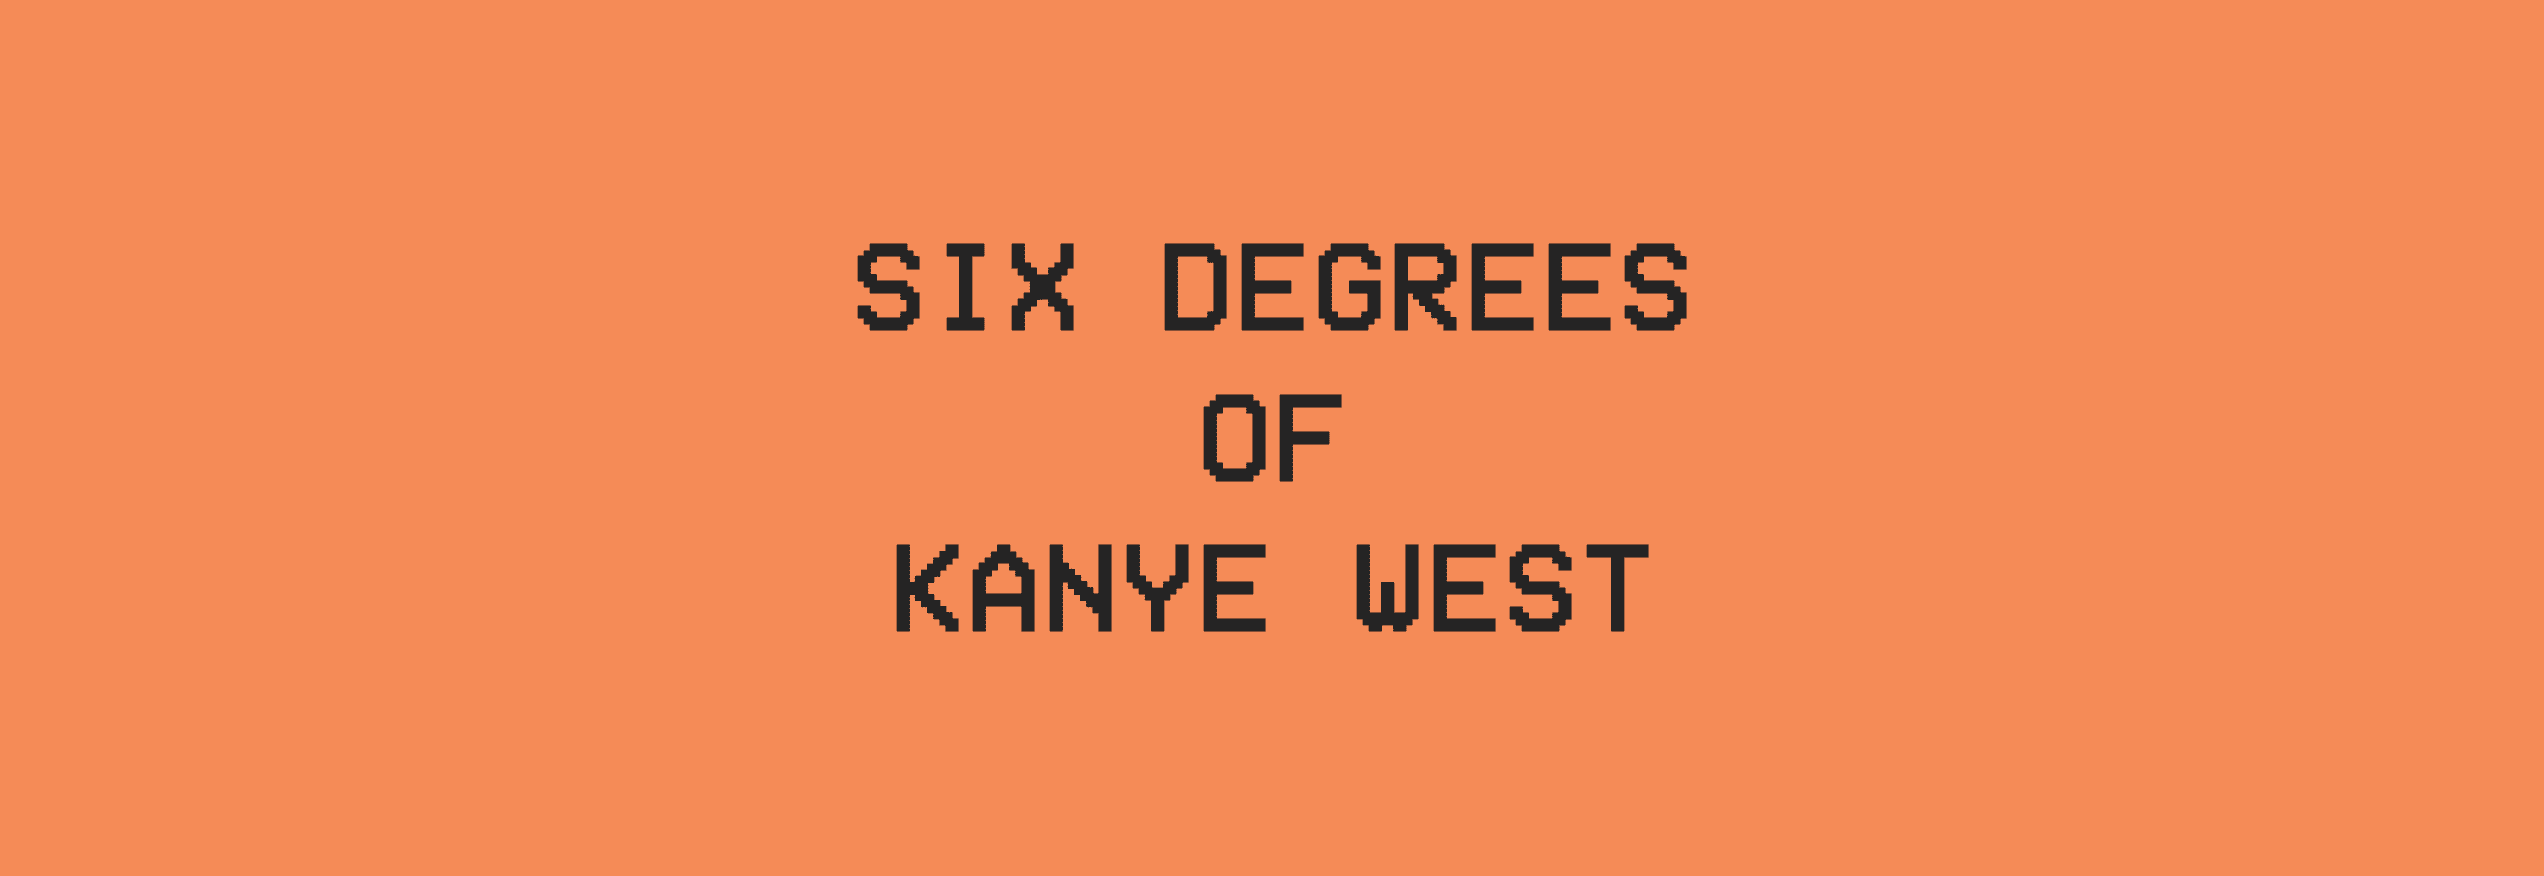 Six Degrees of Kanye West cover image